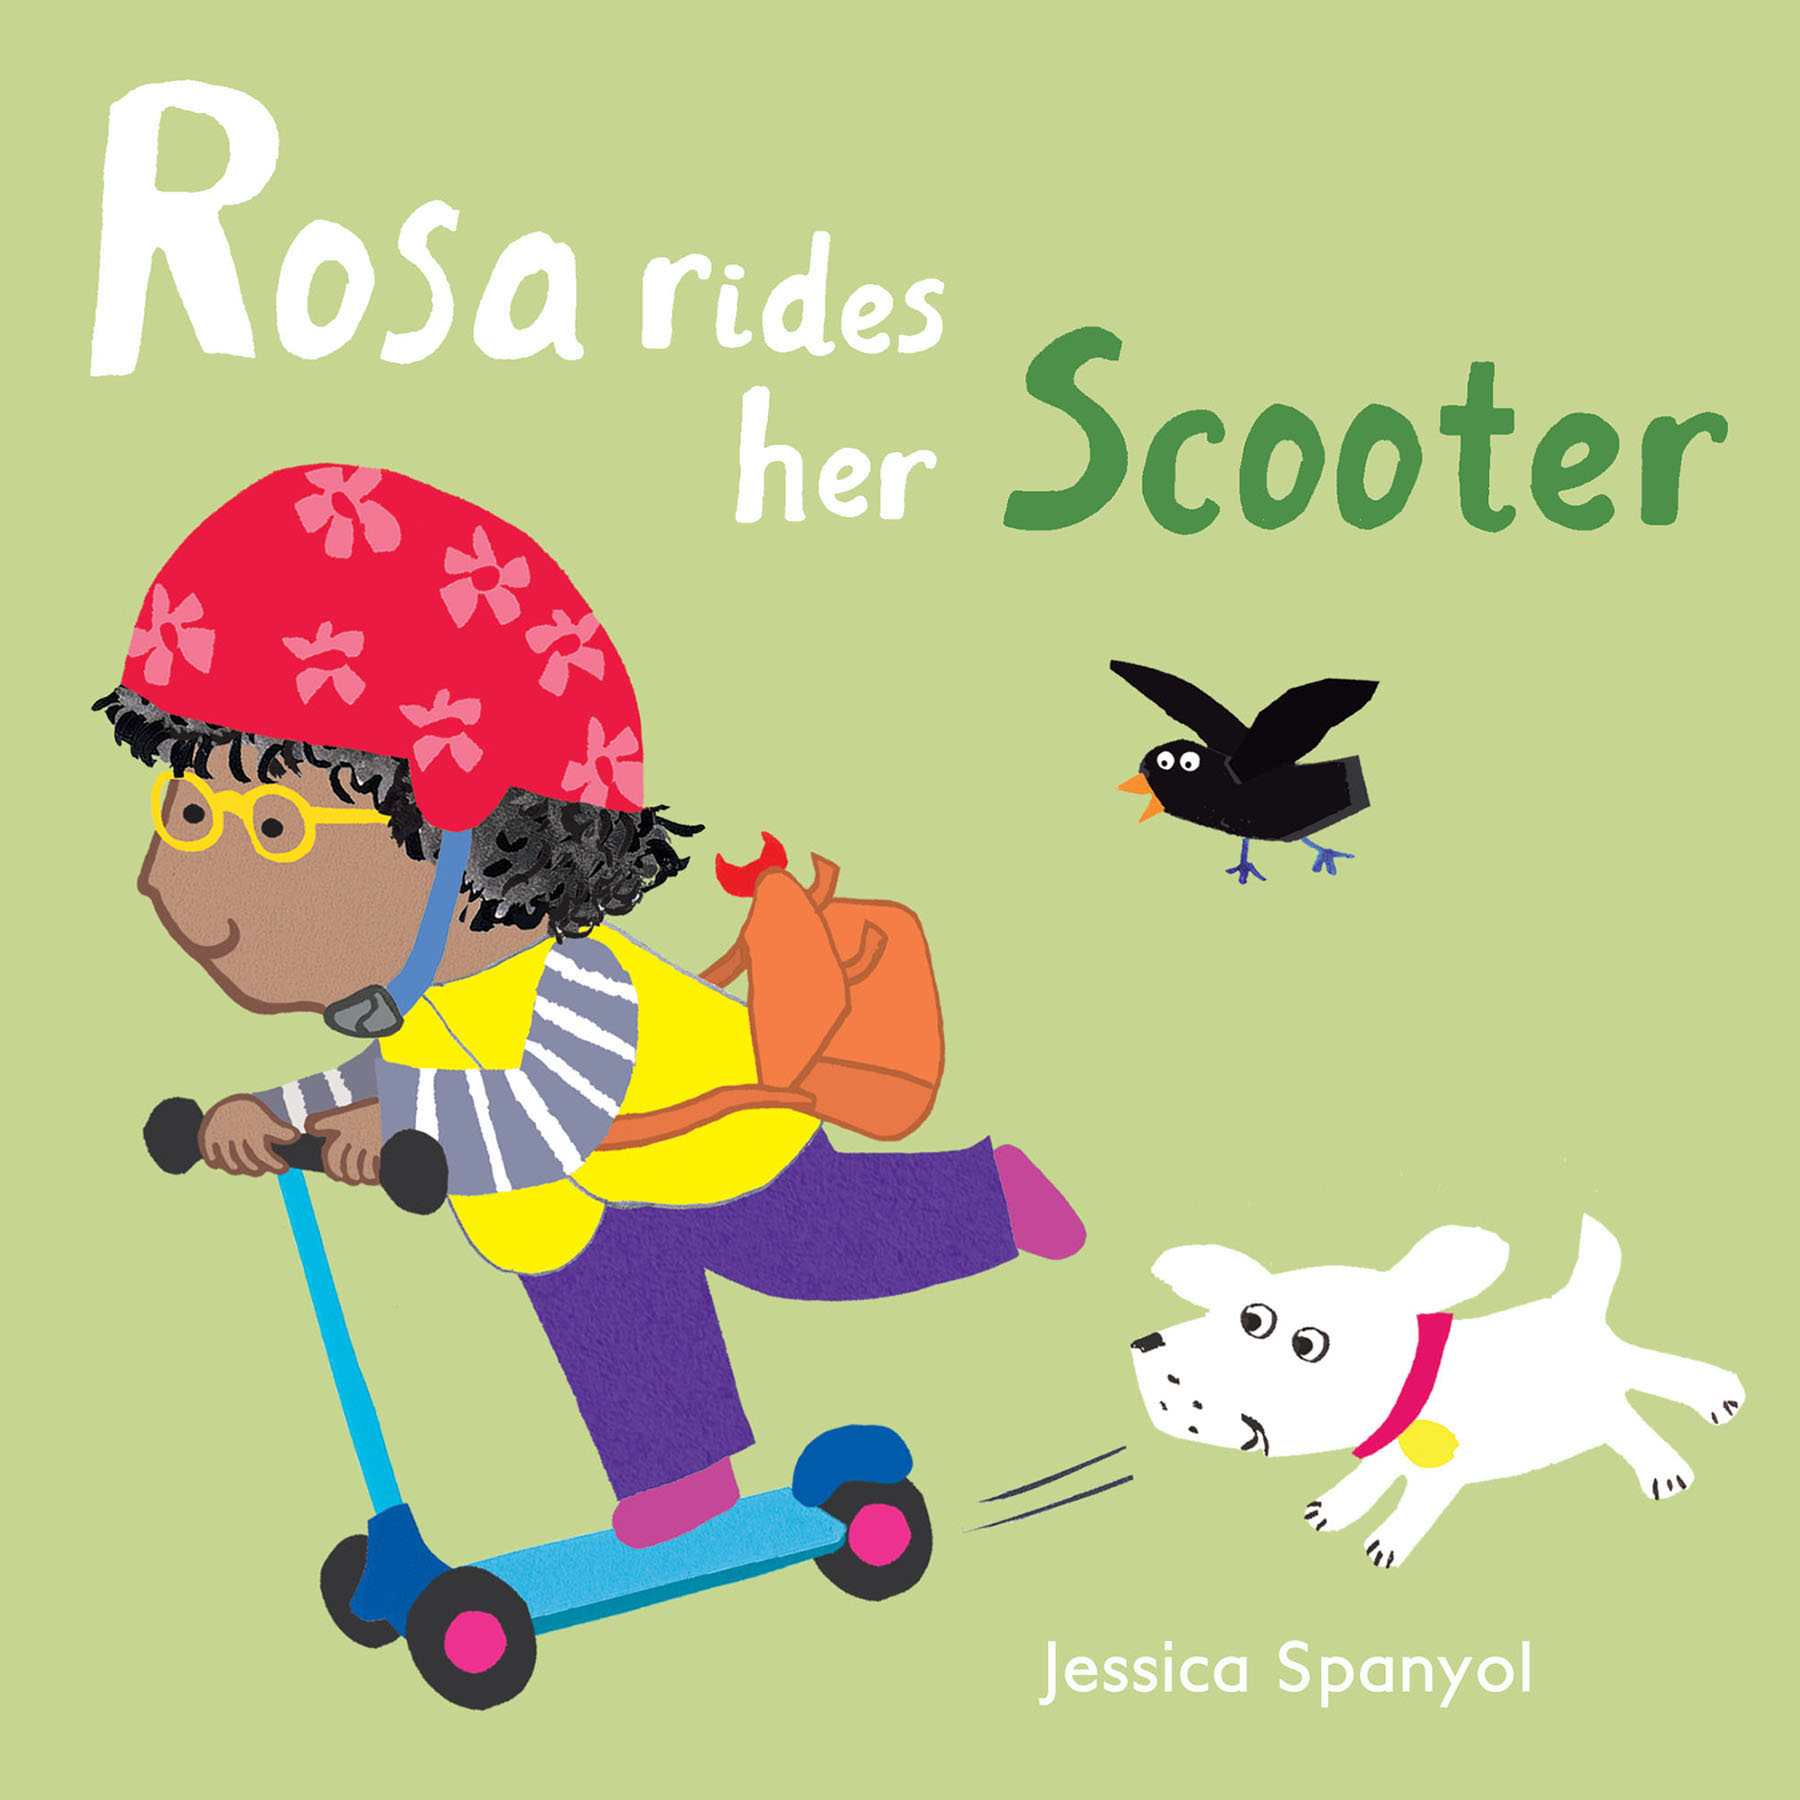 Child's Play Books All About Rosa Bilingual Board Books, Set of 4 image number null